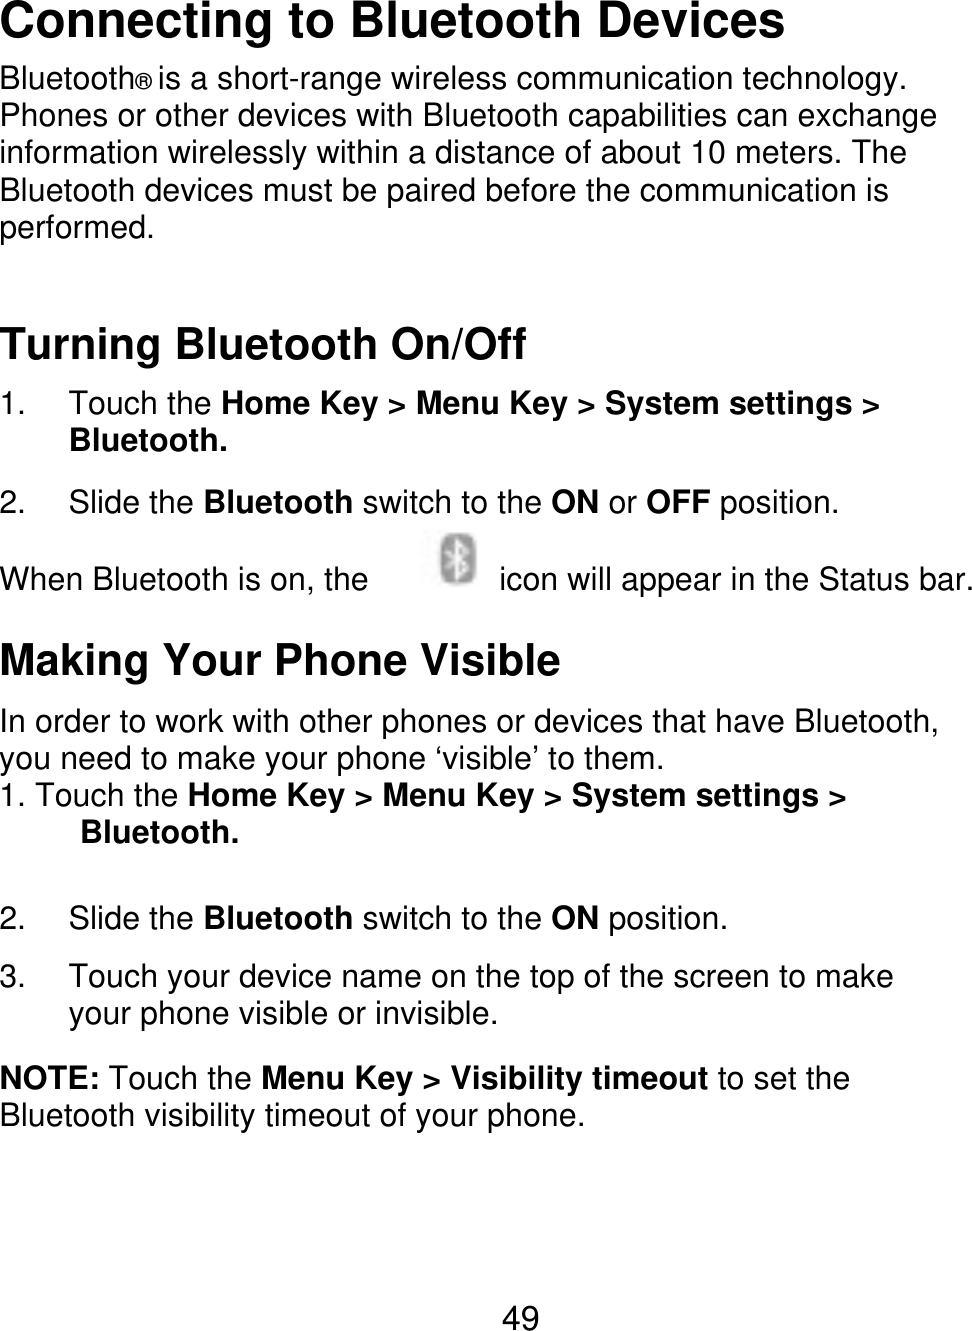 Connecting to Bluetooth Devices Bluetooth® is a short-range wireless communication technology. Phones or other devices with Bluetooth capabilities can exchange information wirelessly within a distance of about 10 meters. The Bluetooth devices must be paired before the communication is performed. Turning Bluetooth On/Off 1. 2. Touch the Home Key &gt; Menu Key &gt; System settings &gt; Bluetooth. Slide the Bluetooth switch to the ON or OFF position. icon will appear in the Status bar. When Bluetooth is on, the Making Your Phone Visible In order to work with other phones or devices that have Bluetooth, you need to make your phone ‘visible’ to them. 1. Touch the Home Key &gt; Menu Key &gt; System settings &gt;      Bluetooth. 2. 3. Slide the Bluetooth switch to the ON position. Touch your device name on the top of the screen to make your phone visible or invisible. NOTE: Touch the Menu Key &gt; Visibility timeout to set the Bluetooth visibility timeout of your phone. 49 